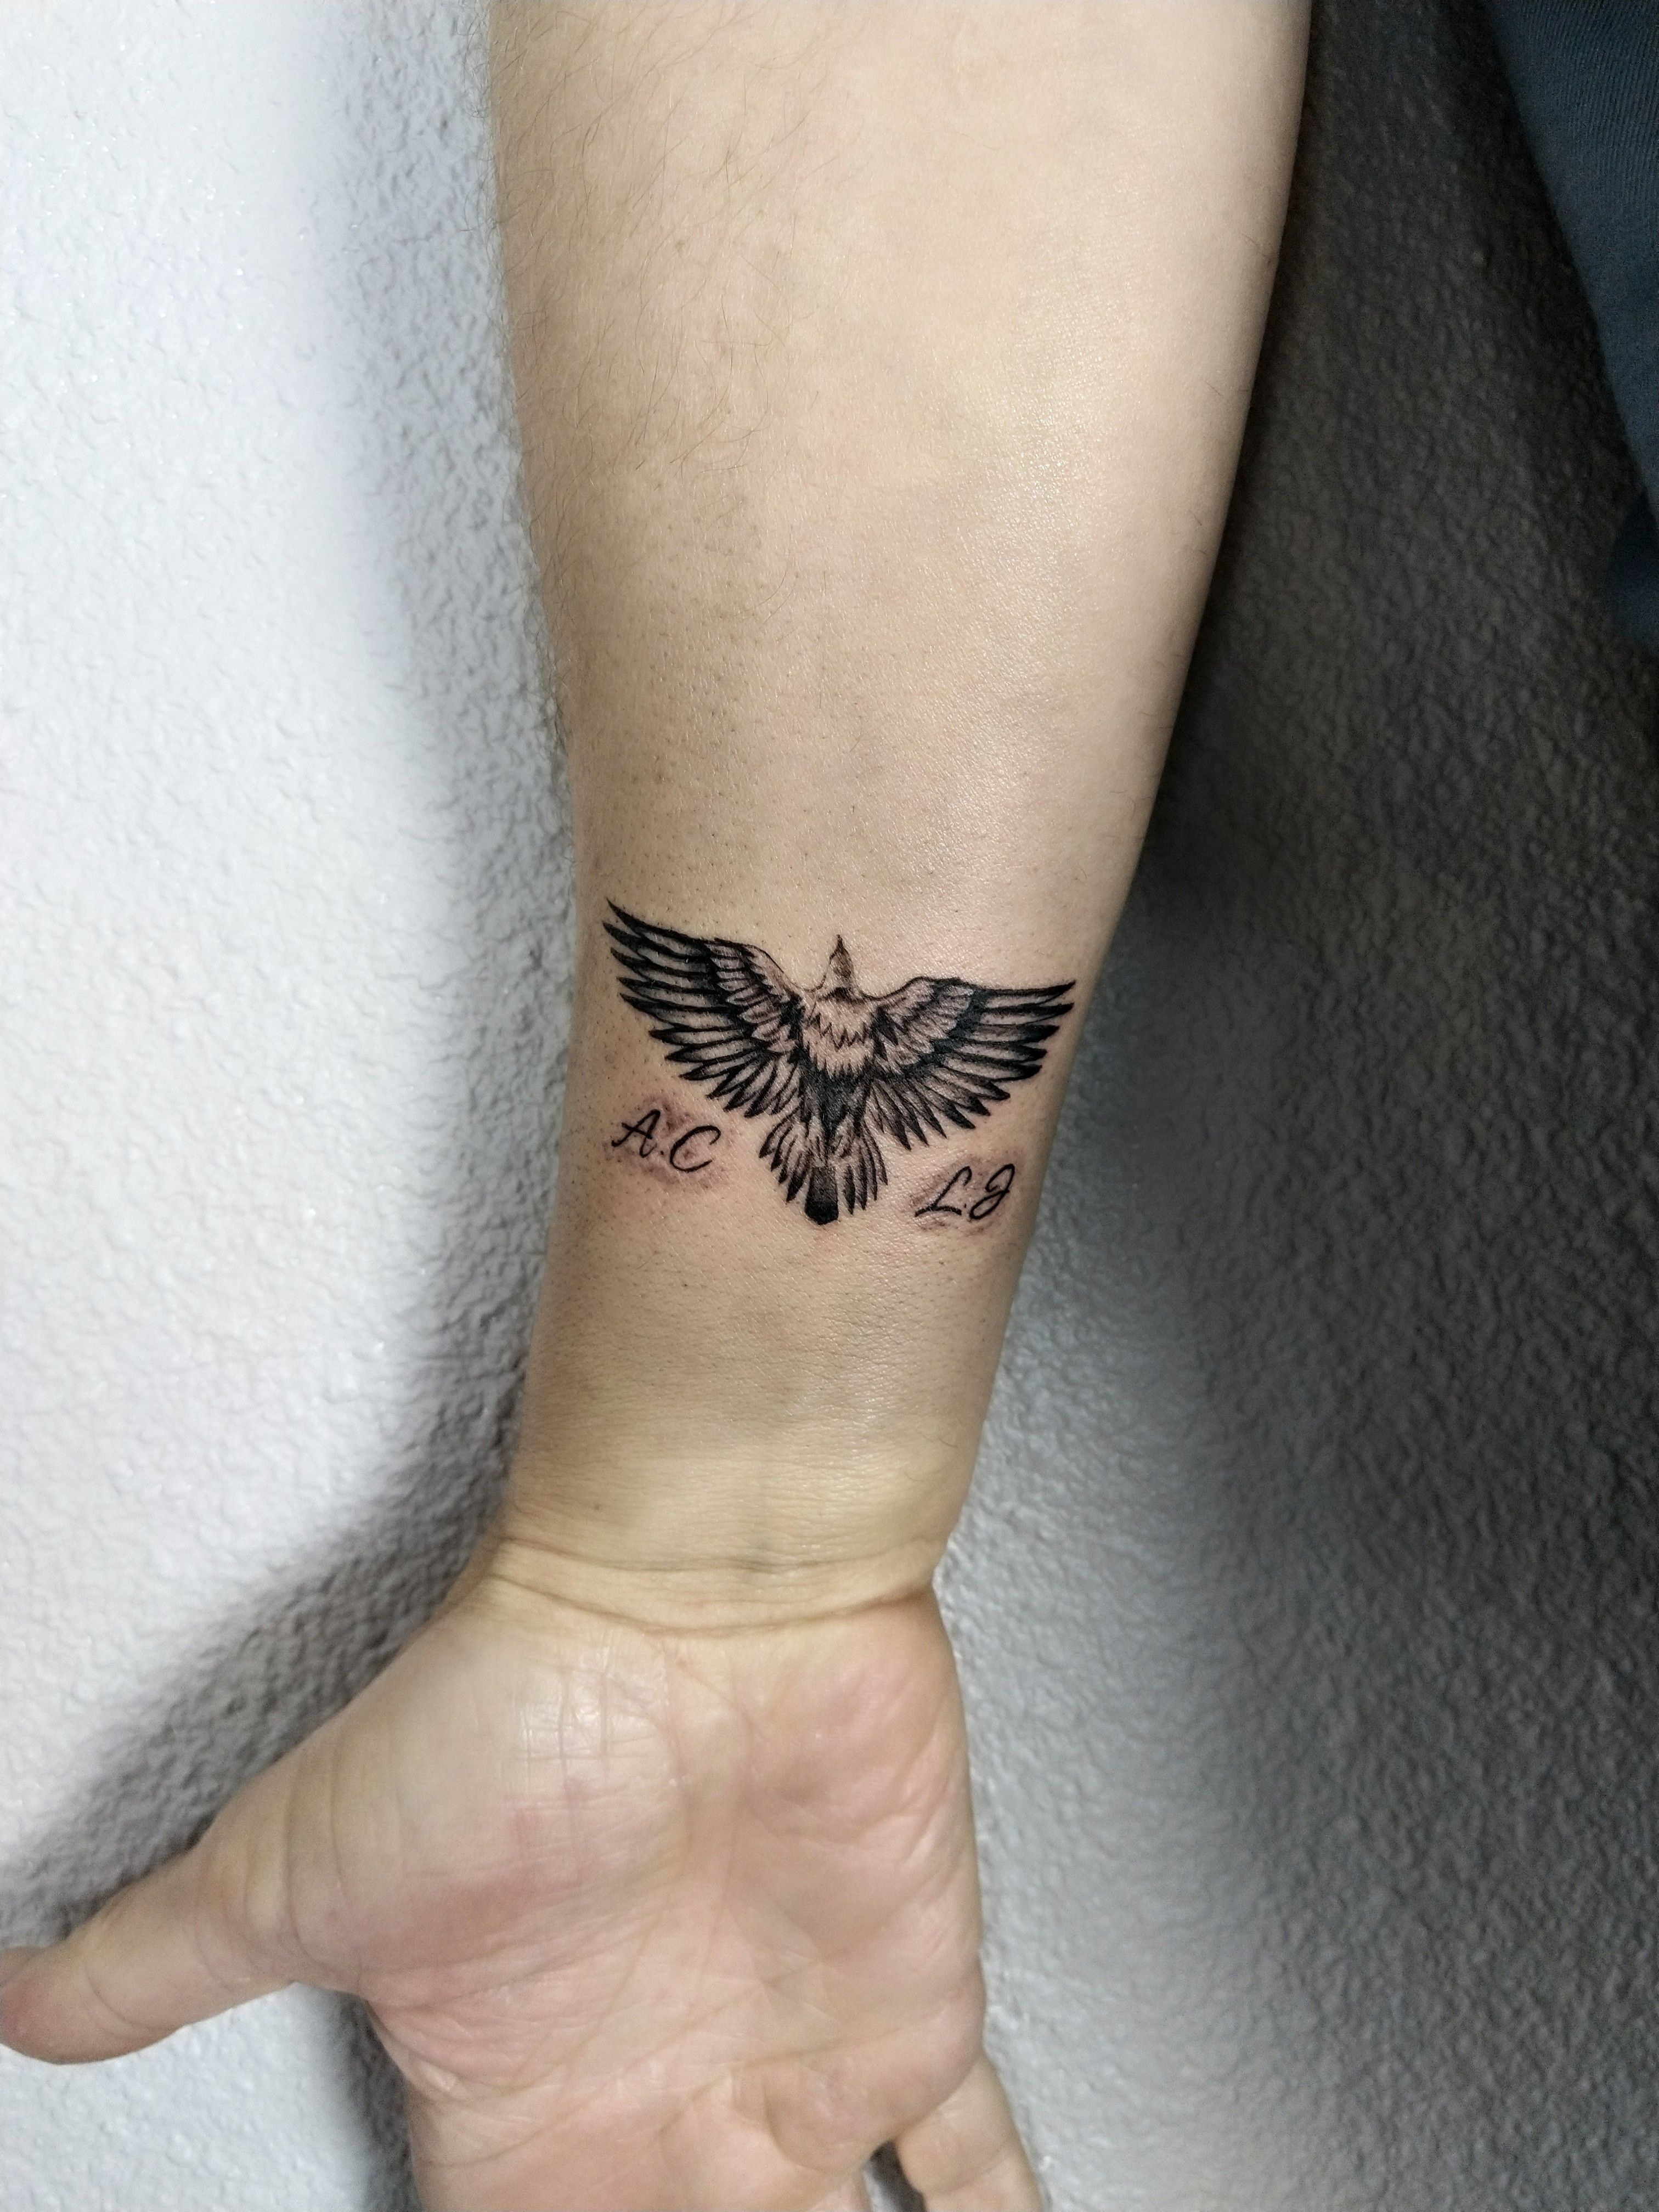 Micro-realistic eagle tattoo on the inner arm.